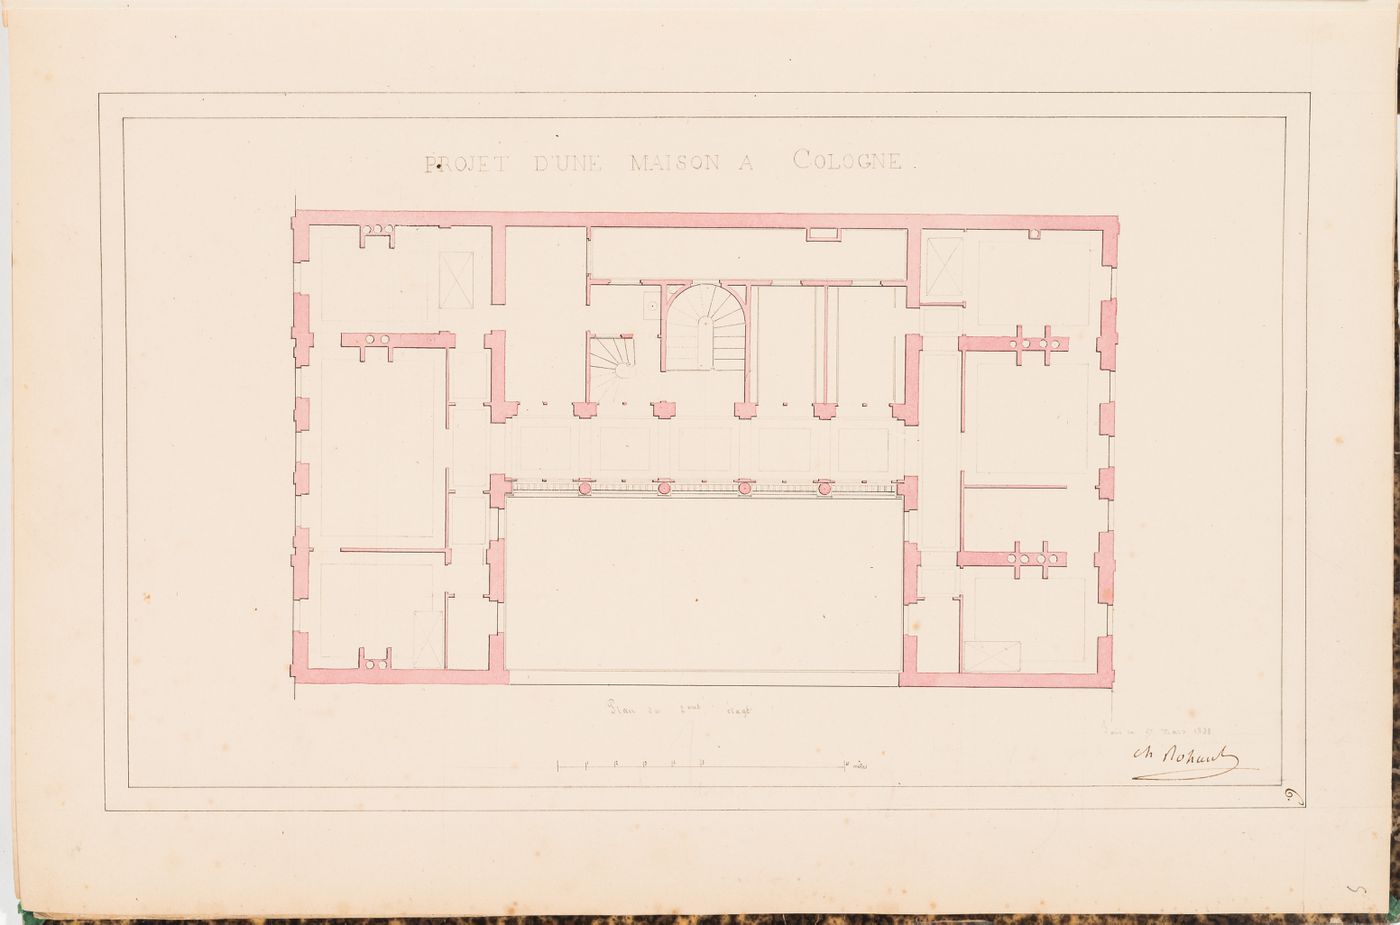 Second floor plan for a three-storey house, Cologne